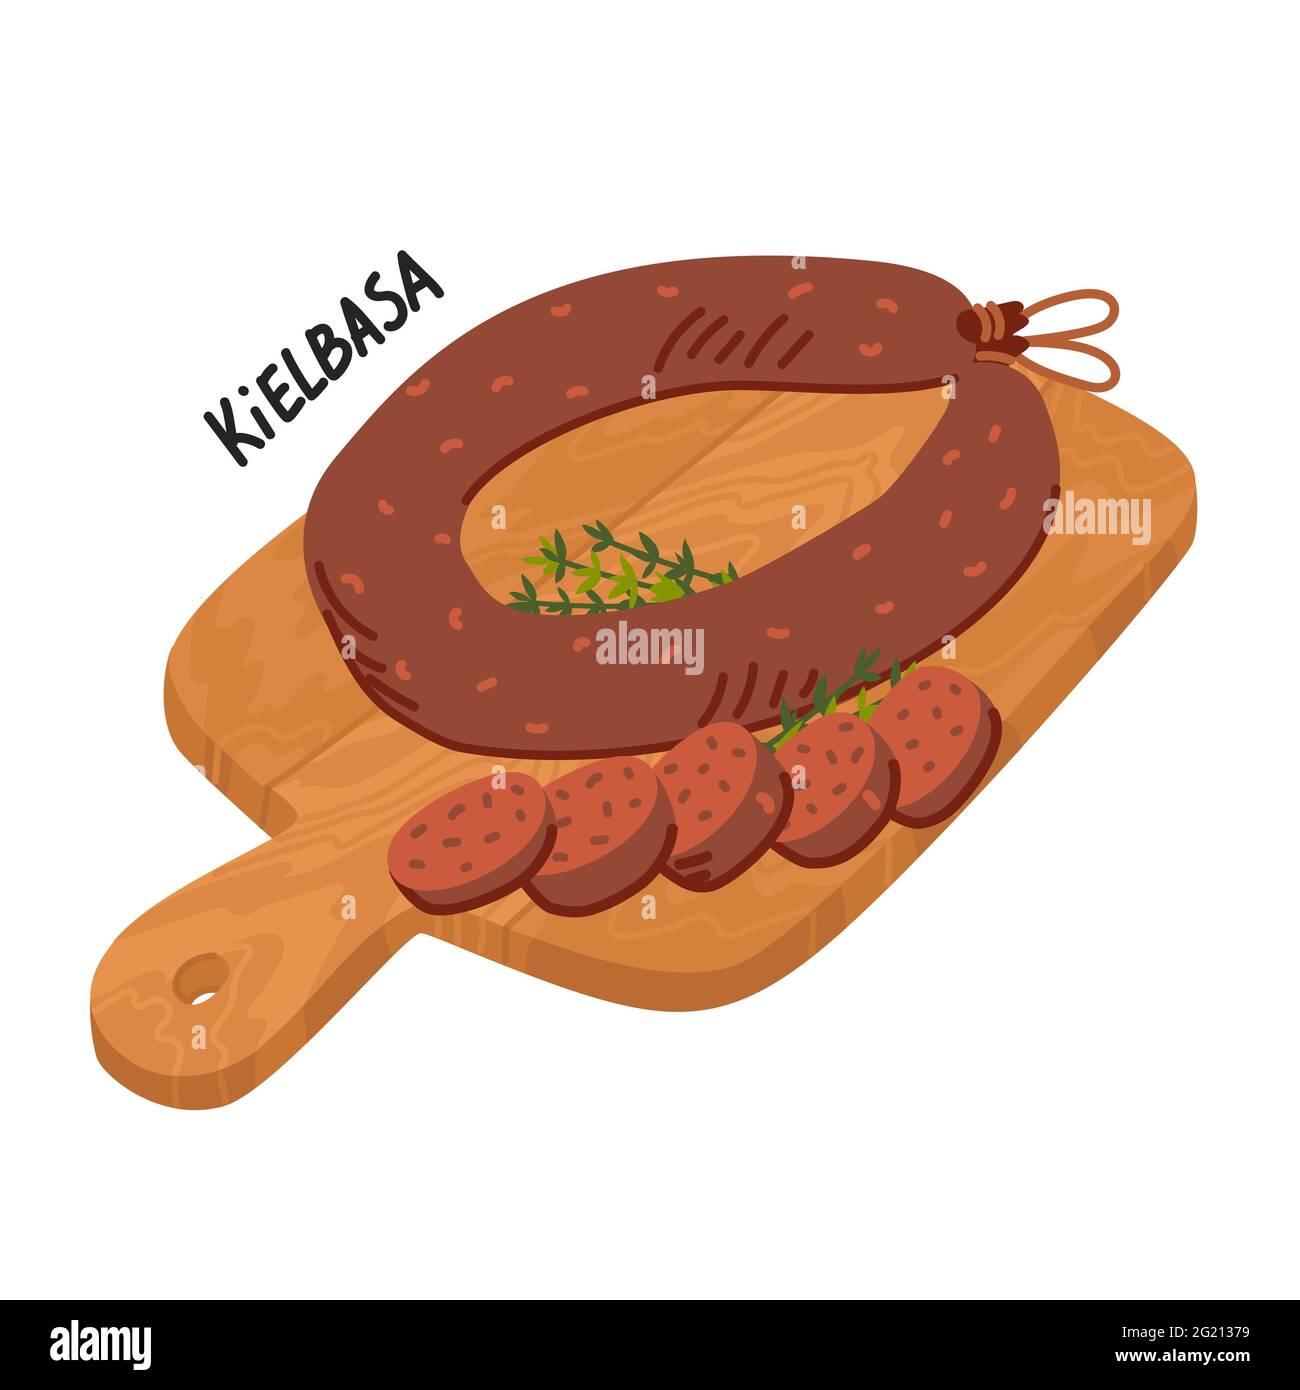 Kielbasa sausage. Meat delicatessen on white background. Slices of typical polish U-shaped smoked sausage on a wooden cutting board.. Simple flat Stock Vector